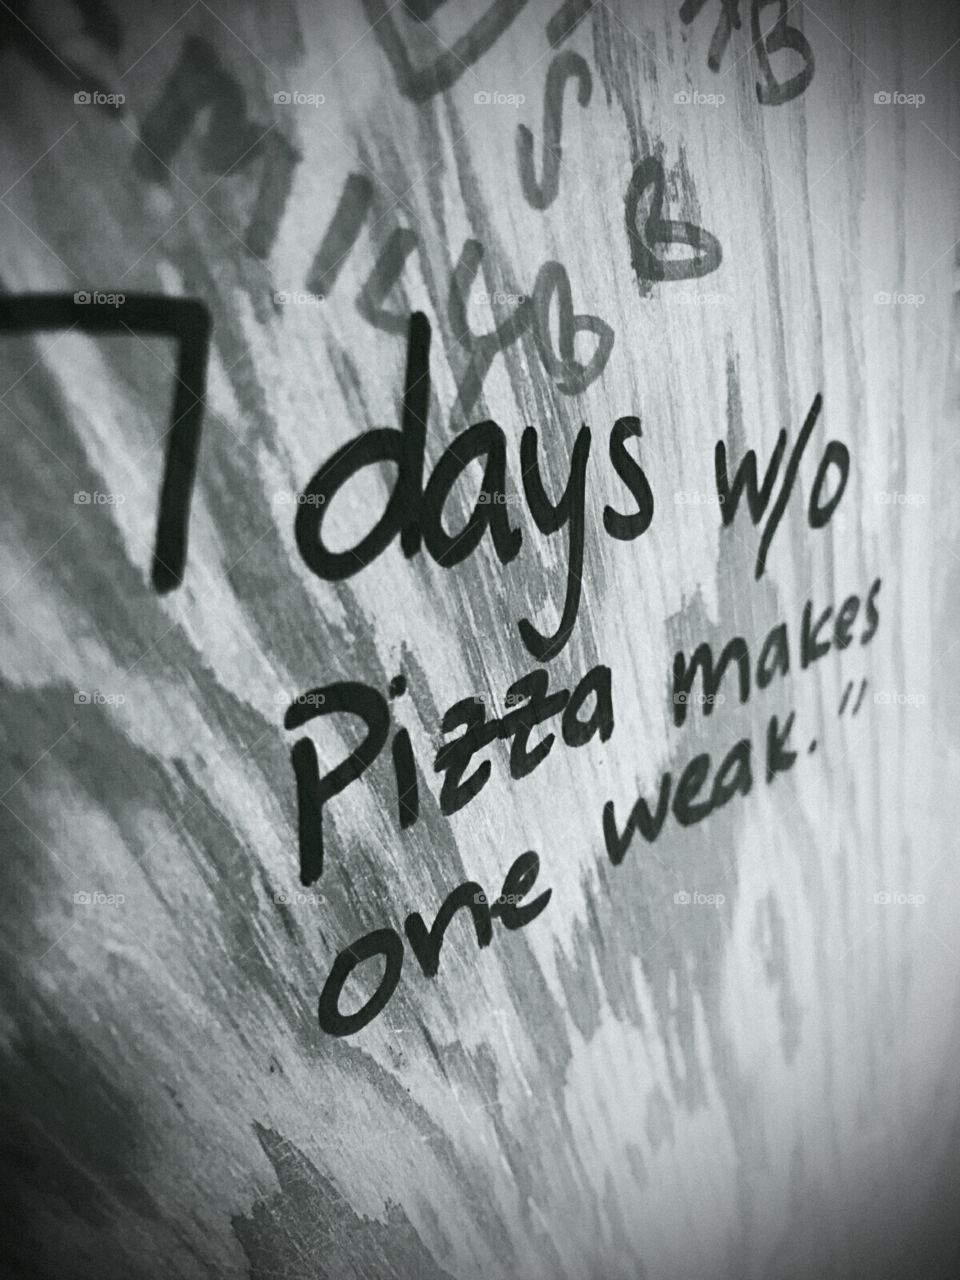 7 days without pizza...